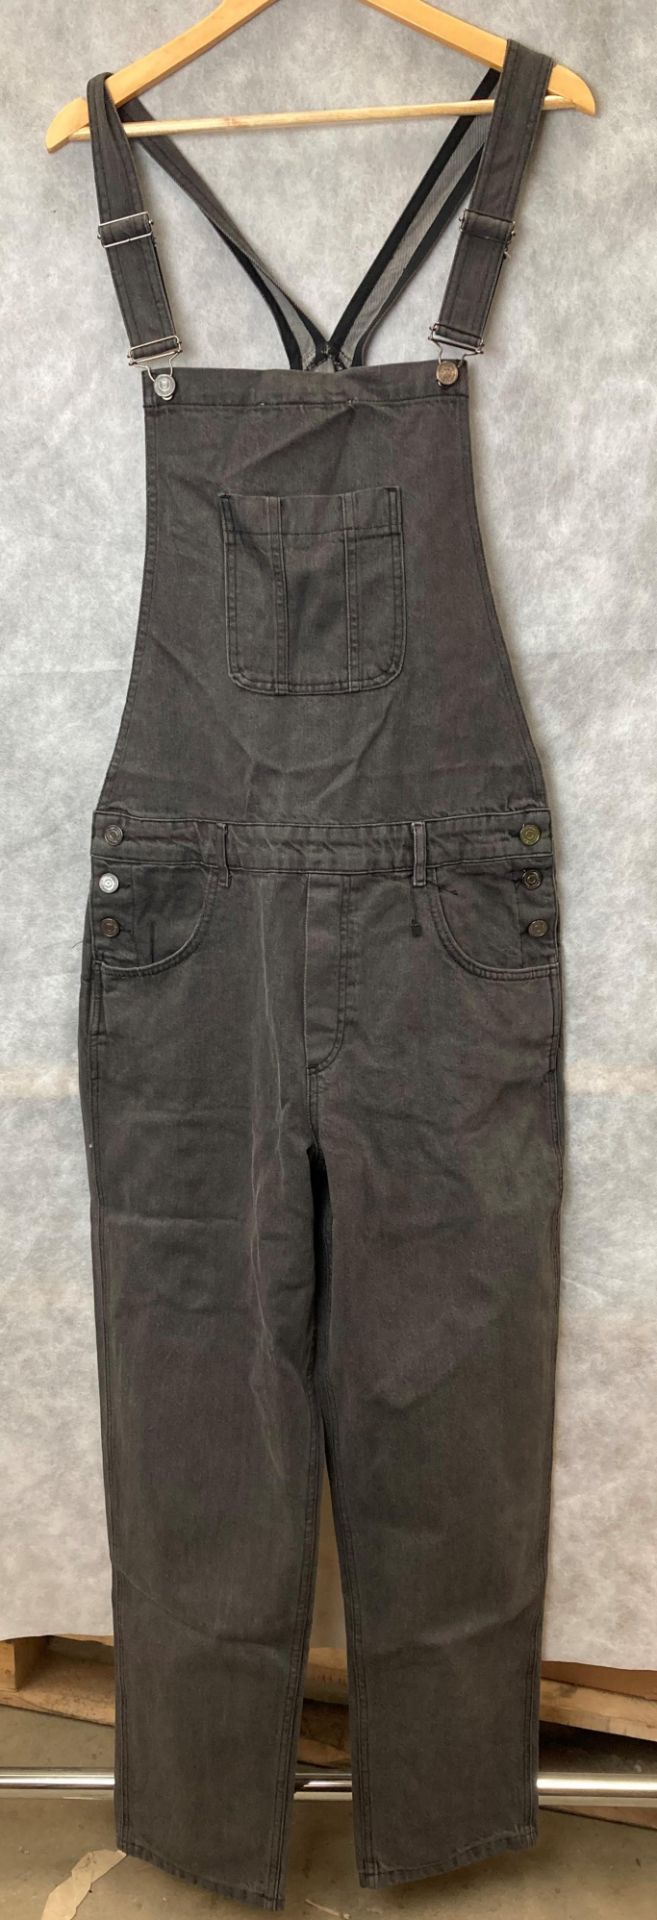 Boohoo Man relaxed fit long dungaree in charcoal size 34/36 (possibly new) (AA02)